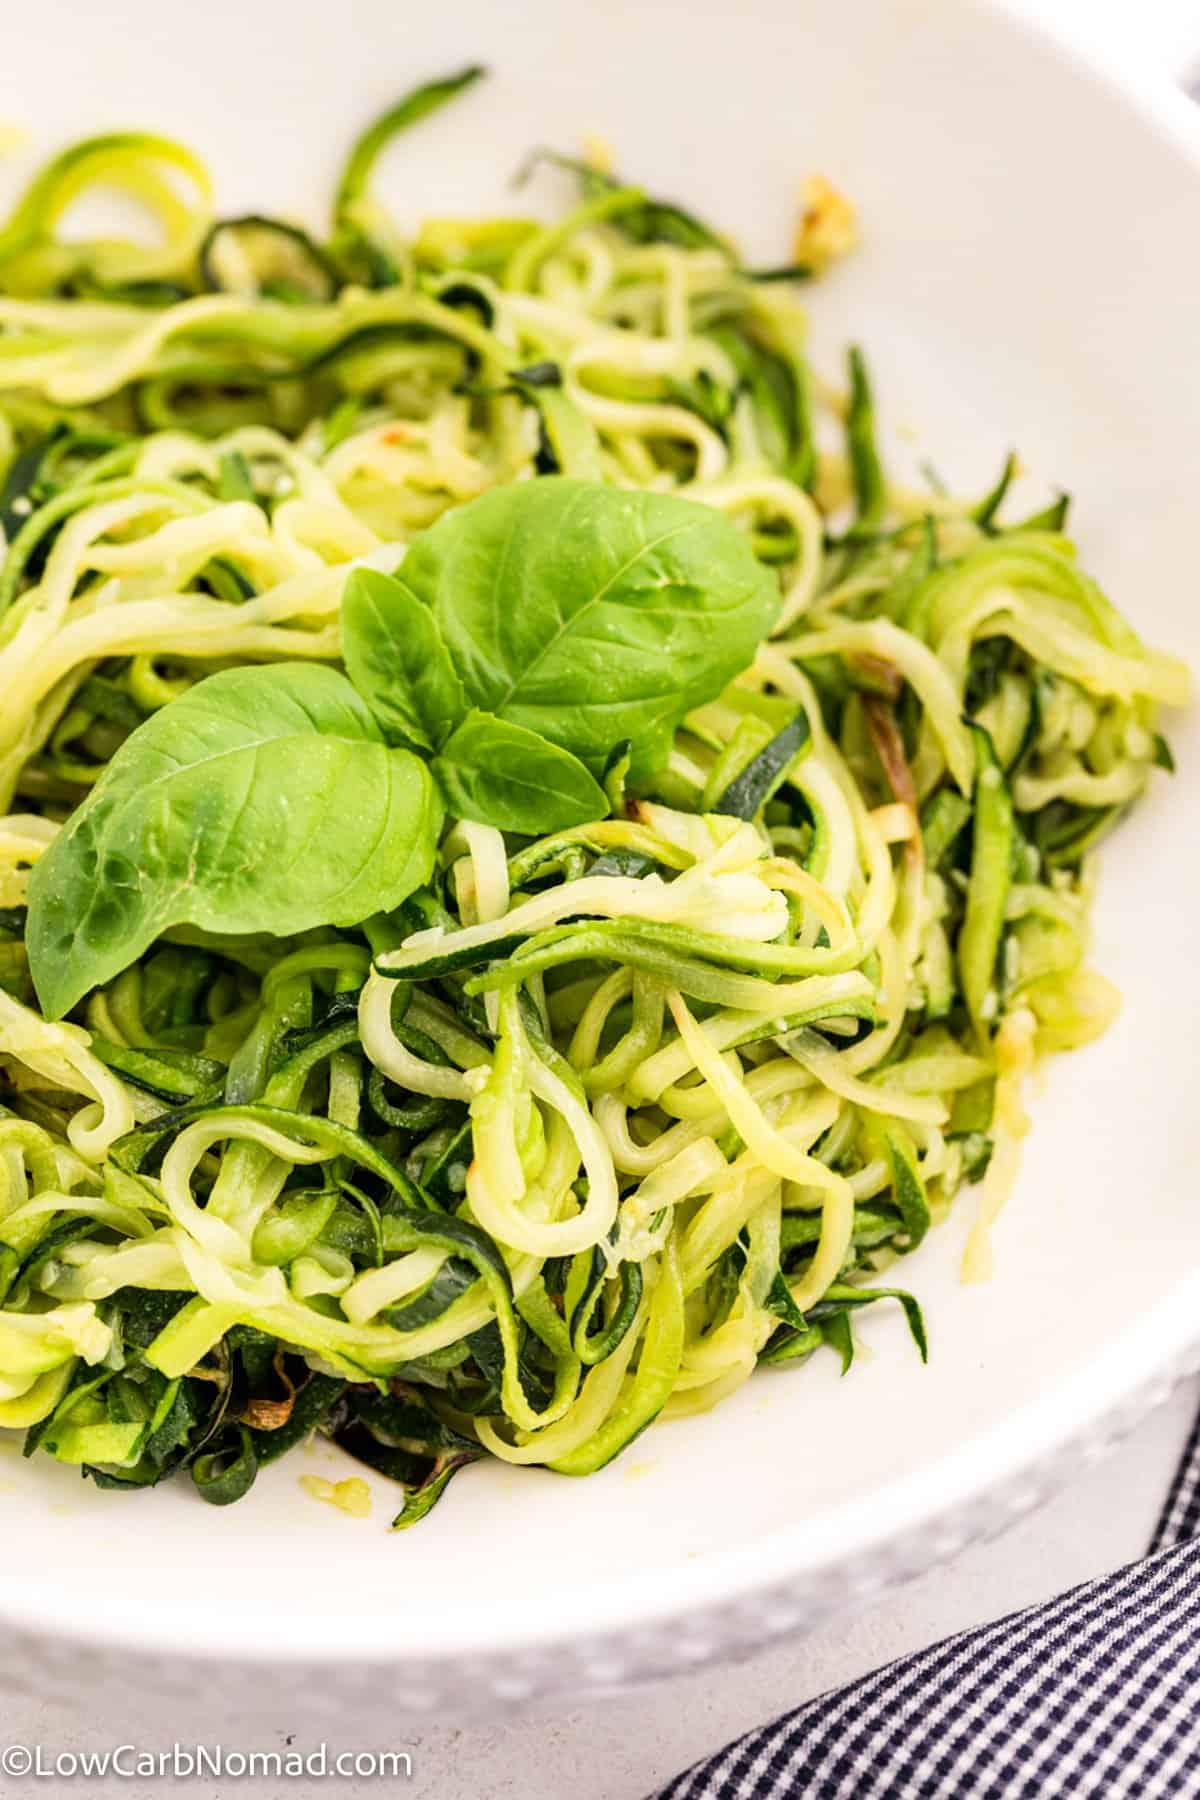 Zucchini Noodle Recipe Garlic, Butter, Parmesan Cheese Low Carb Keto